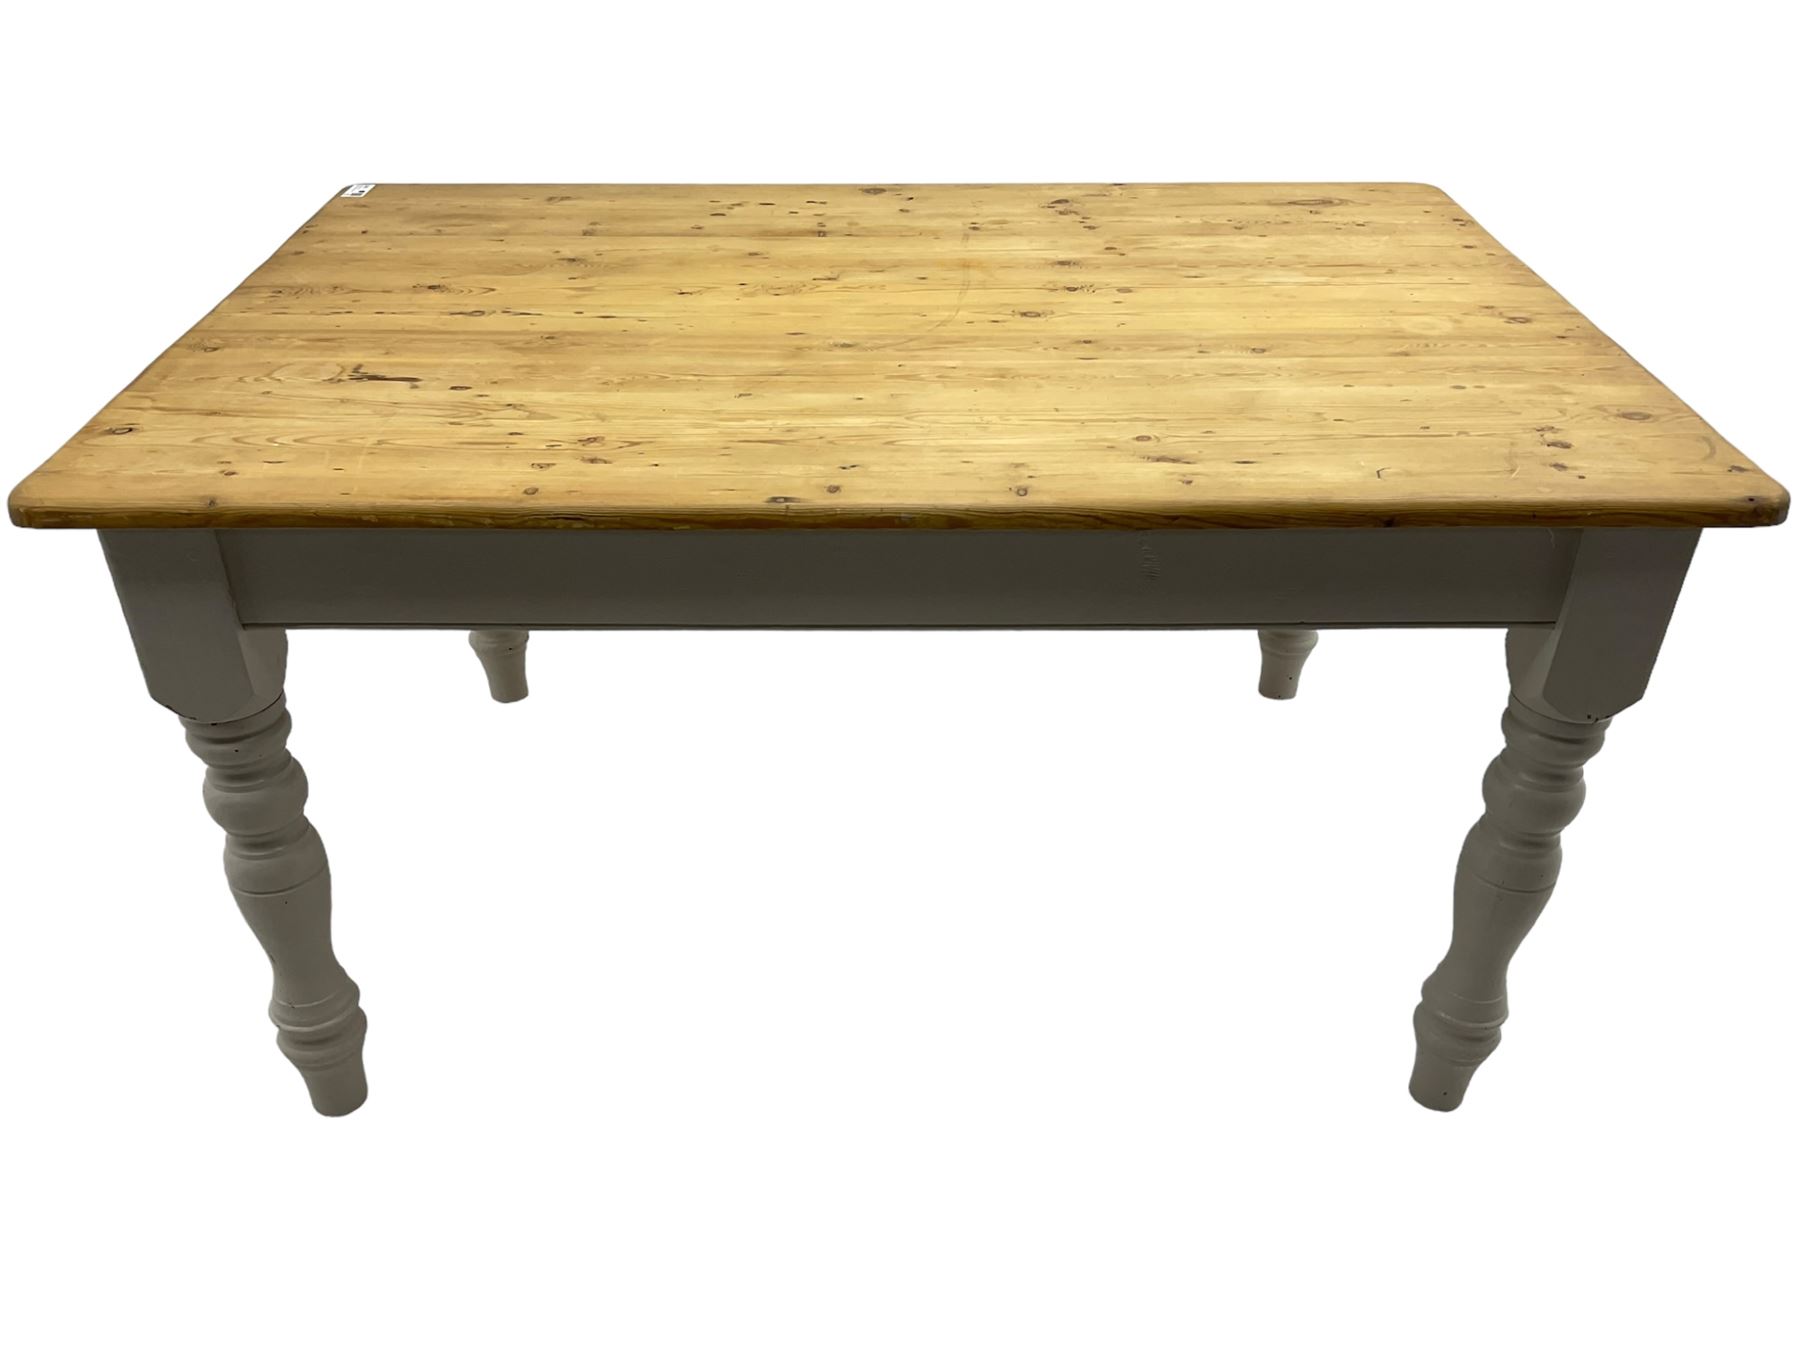 Pine farmhouse kitchen dining table - Image 6 of 7